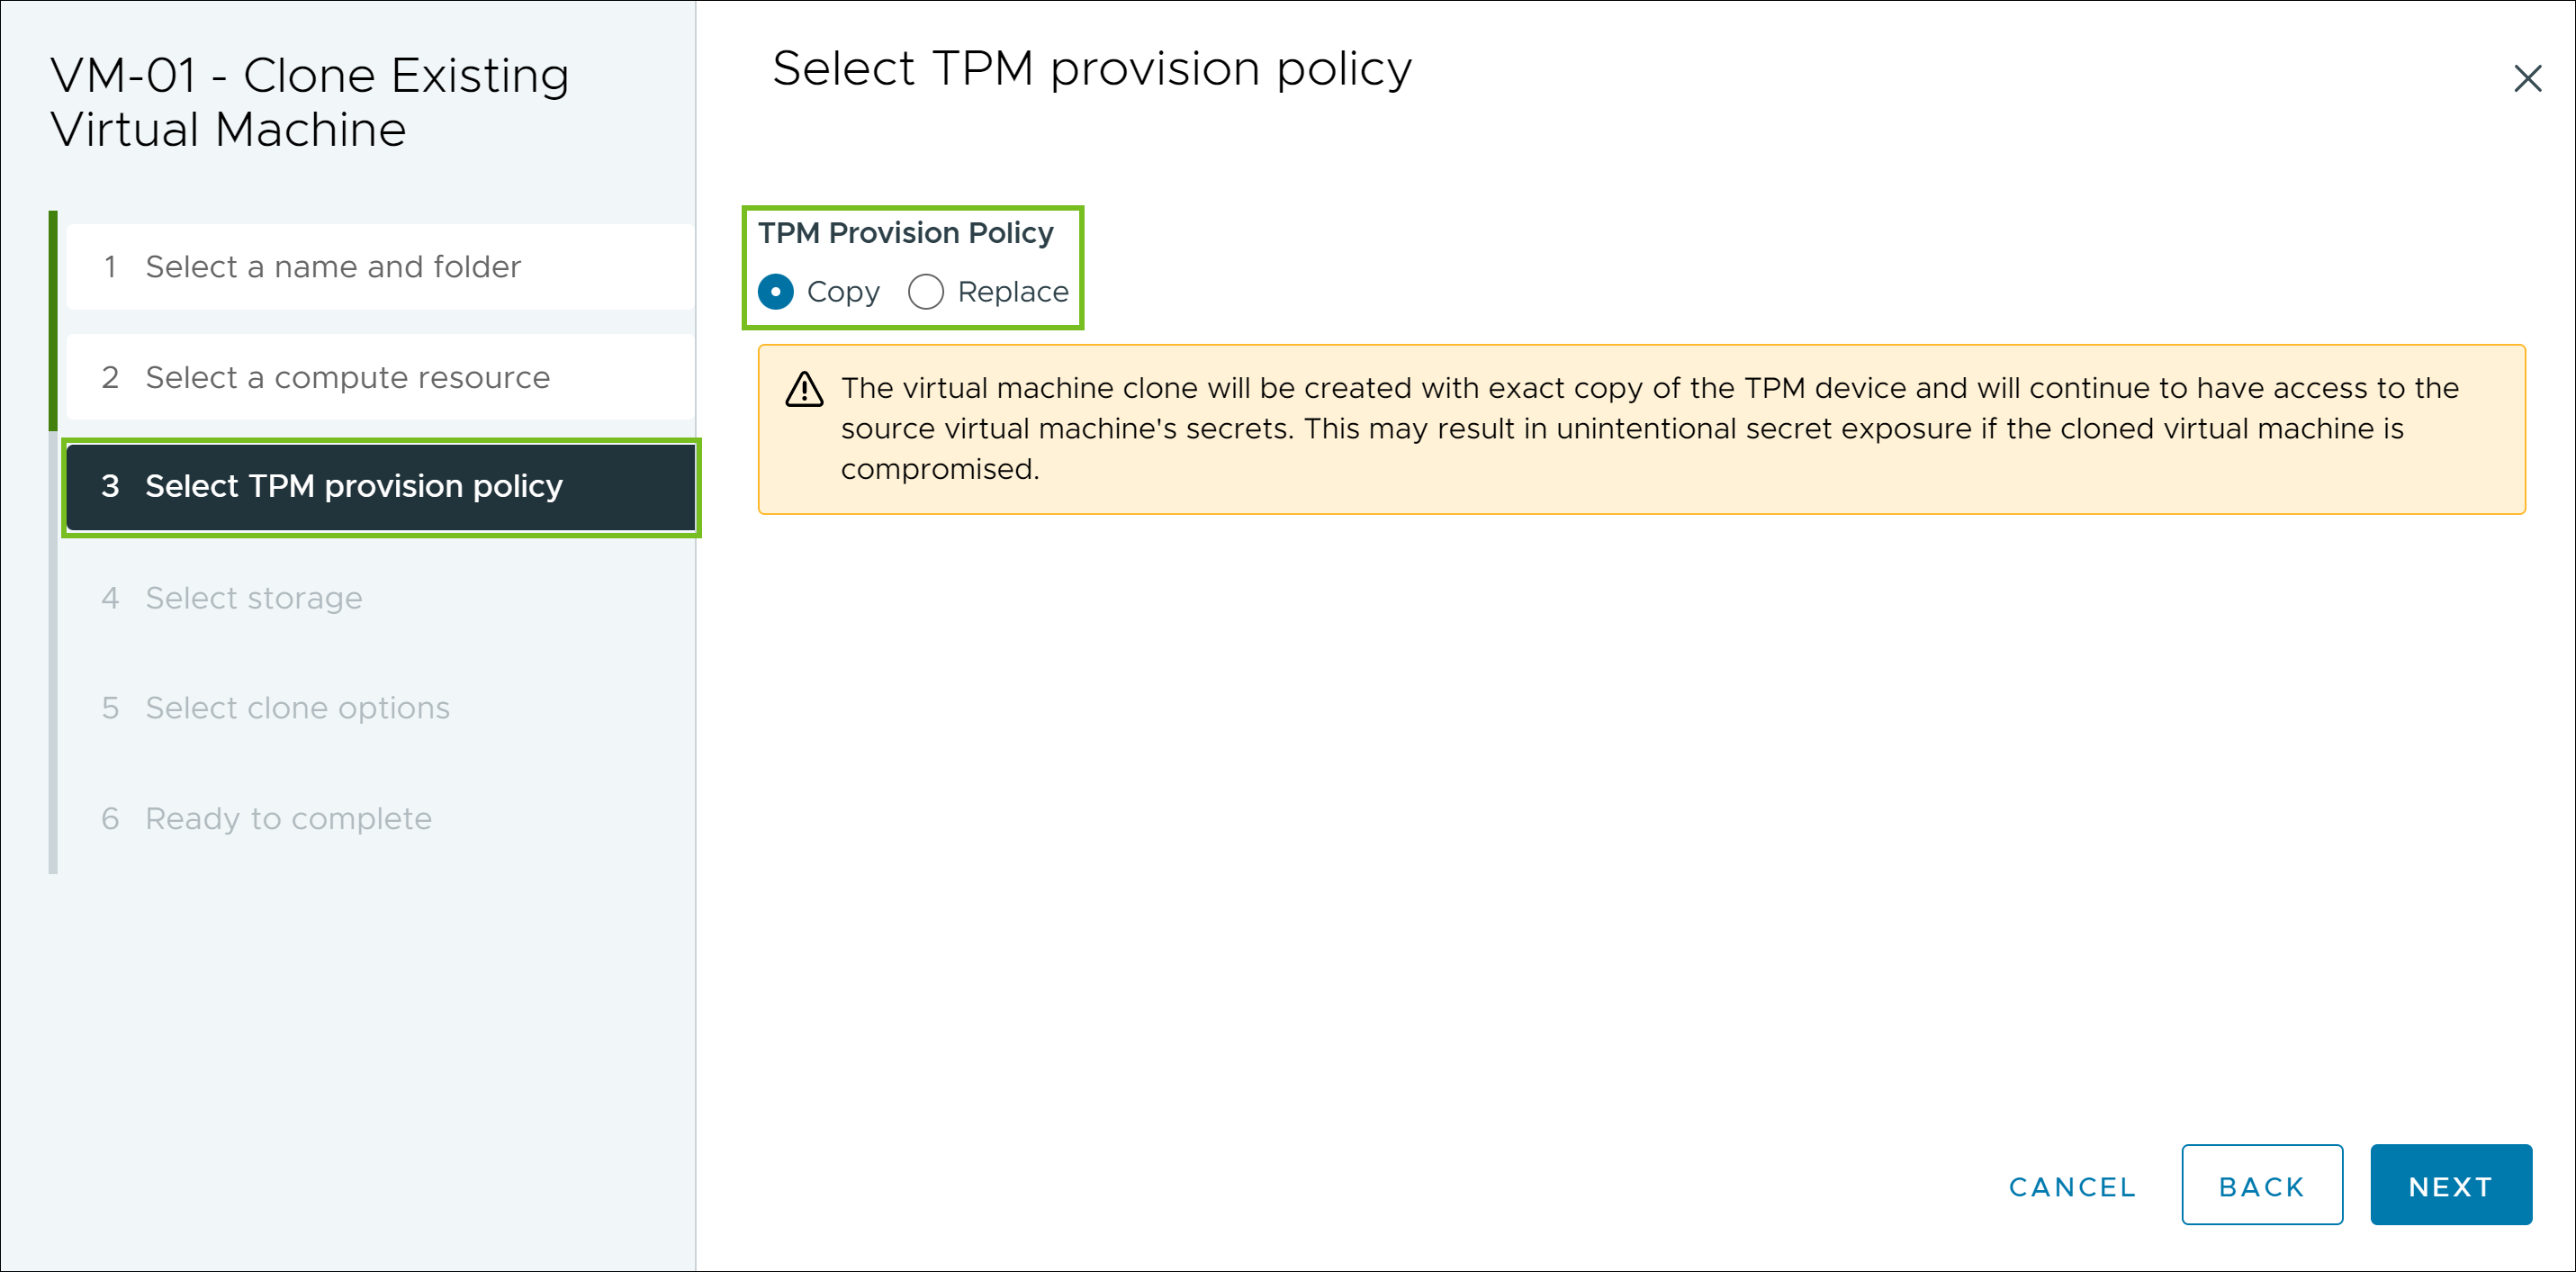 This screen shot shows the choices for TPM provision policy when cloning a virtual machine that has a vTPM.